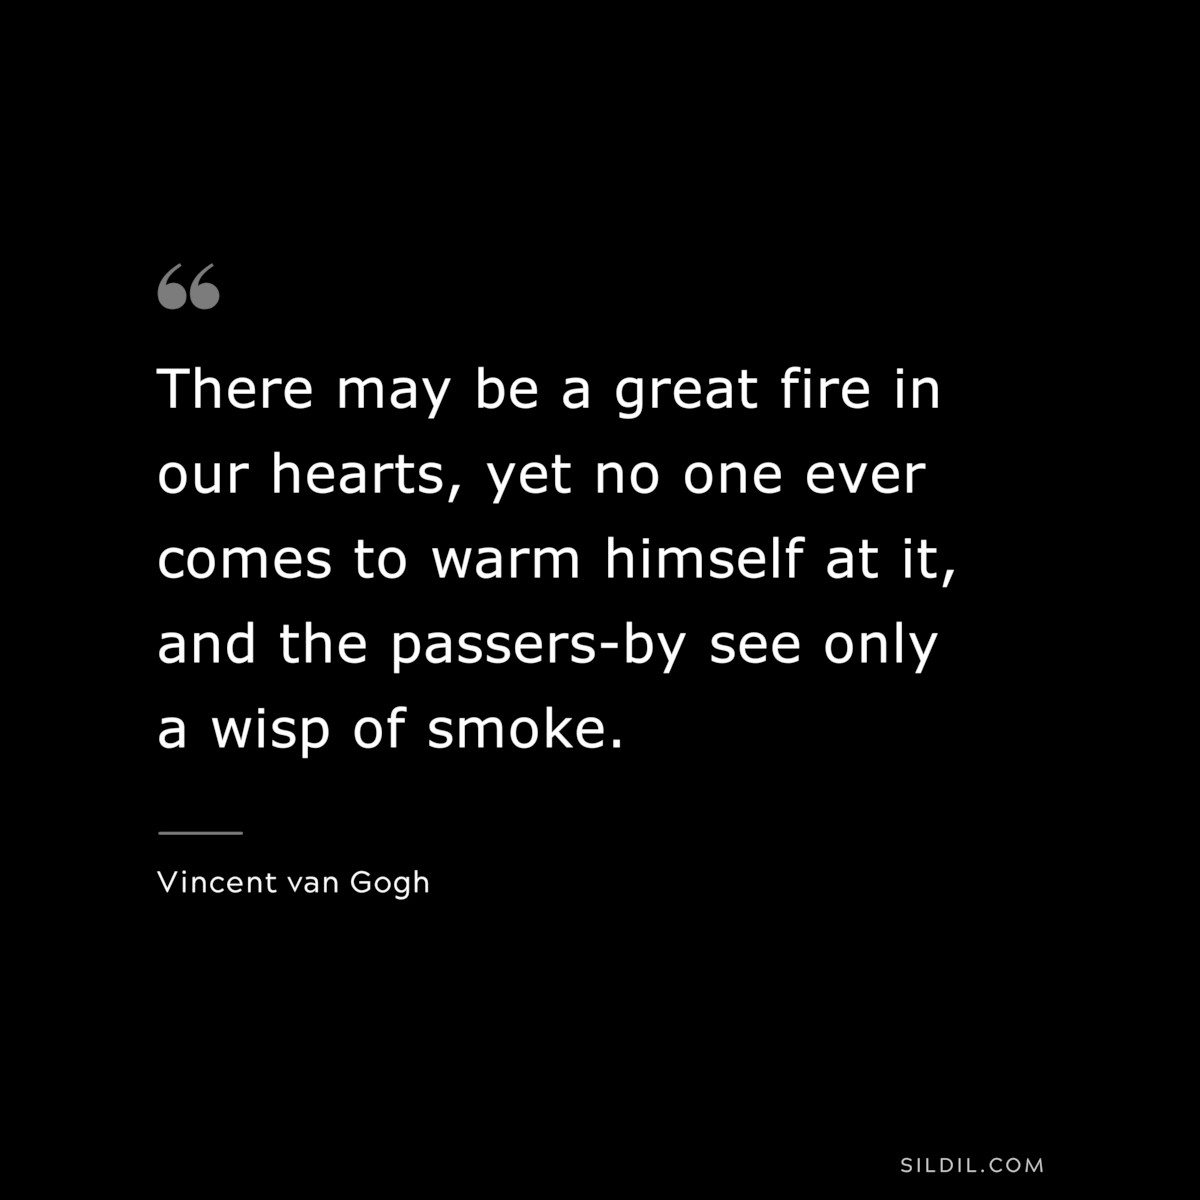 There may be a great fire in our hearts, yet no one ever comes to warm himself at it, and the passers-by see only a wisp of smoke. ― Vincent van Gogh